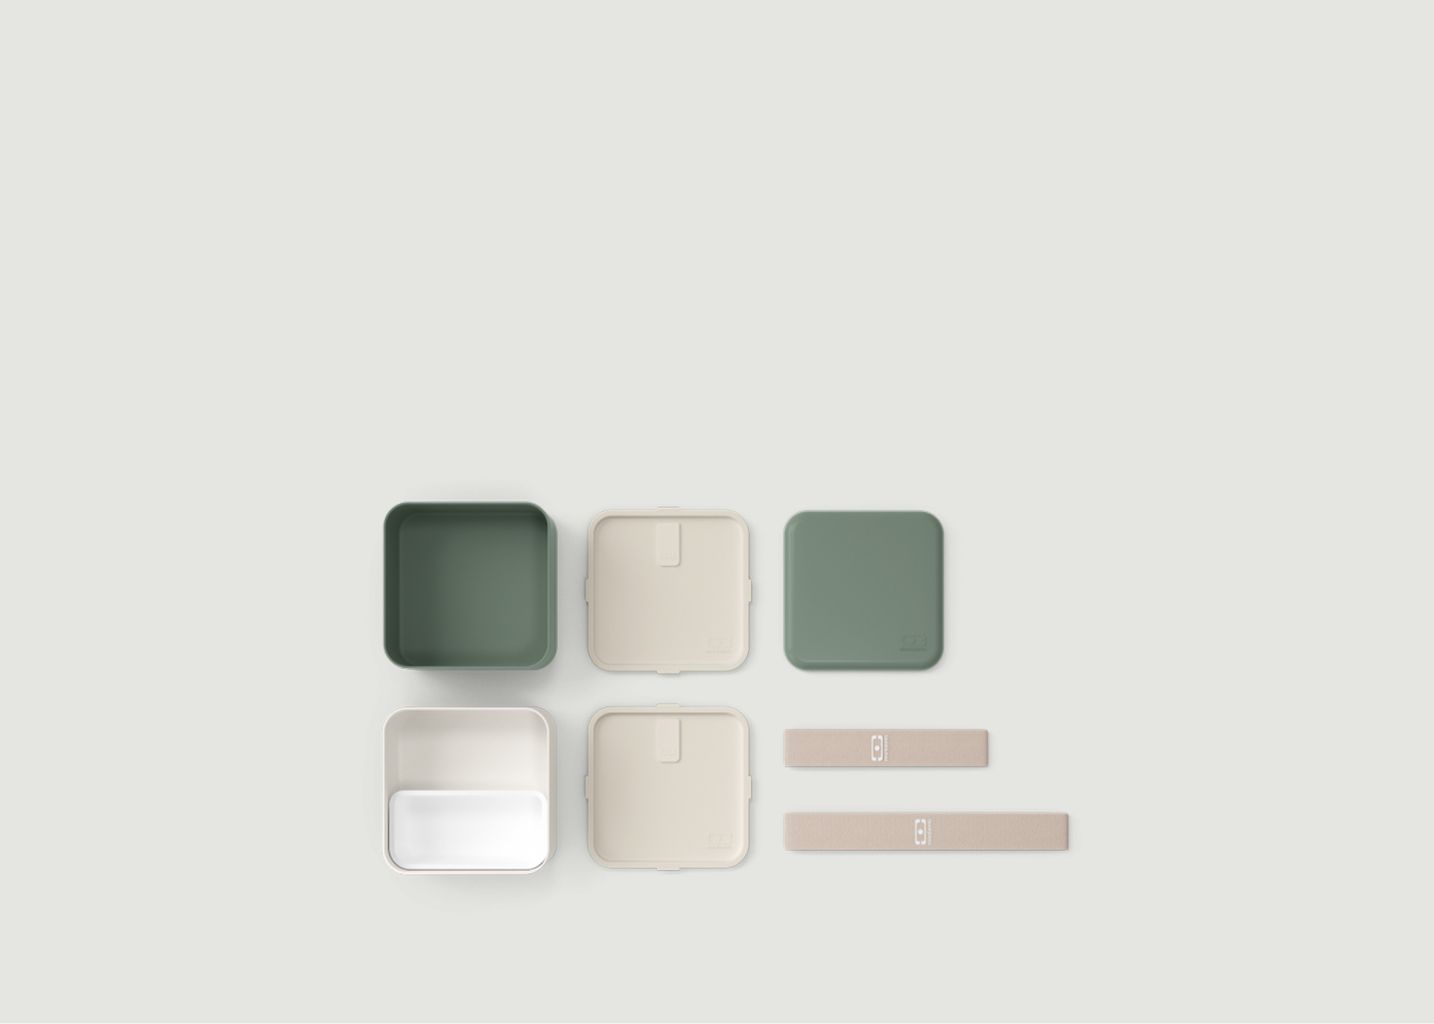 MB Square green Natural - The square bento made in France - monbento